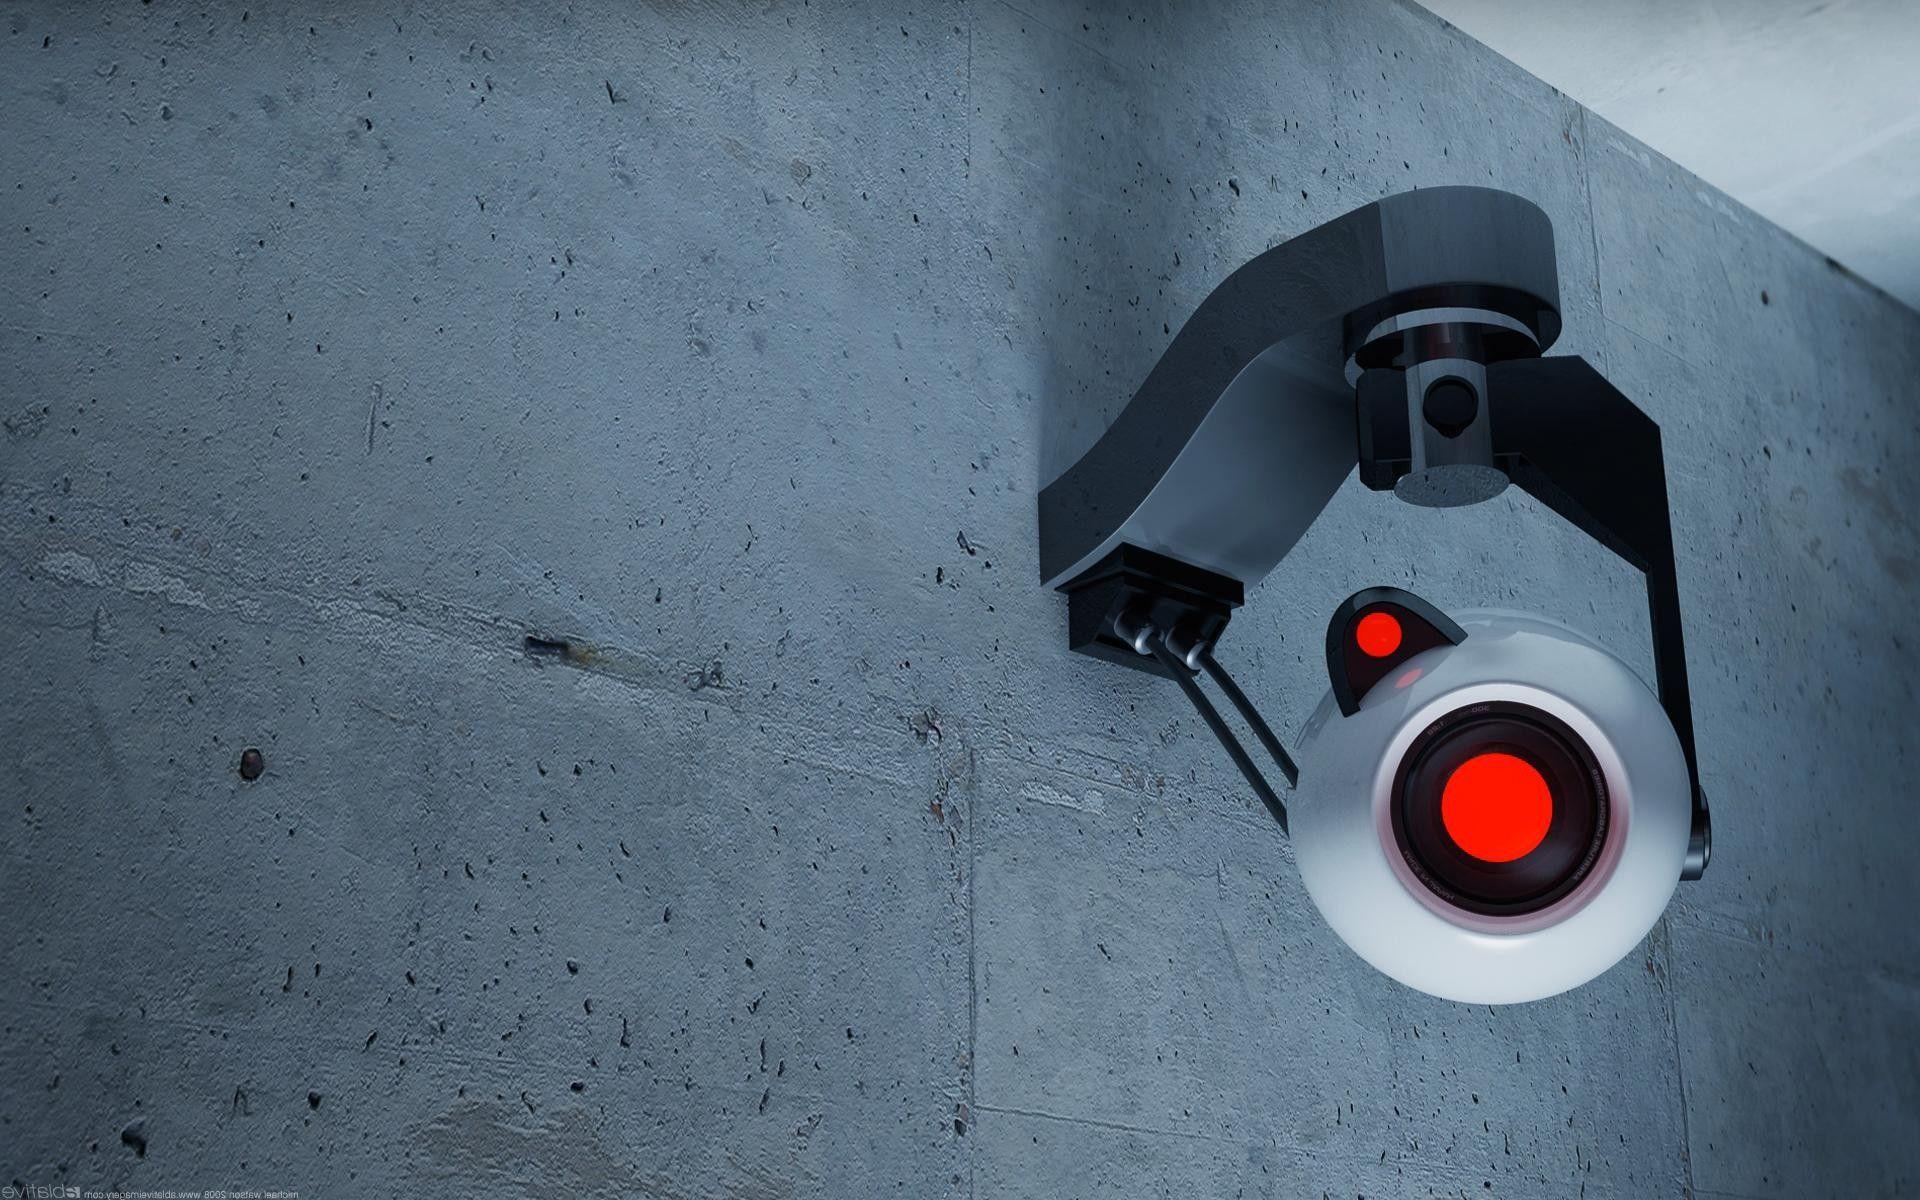 Security Camera on the wall wallpaper and image